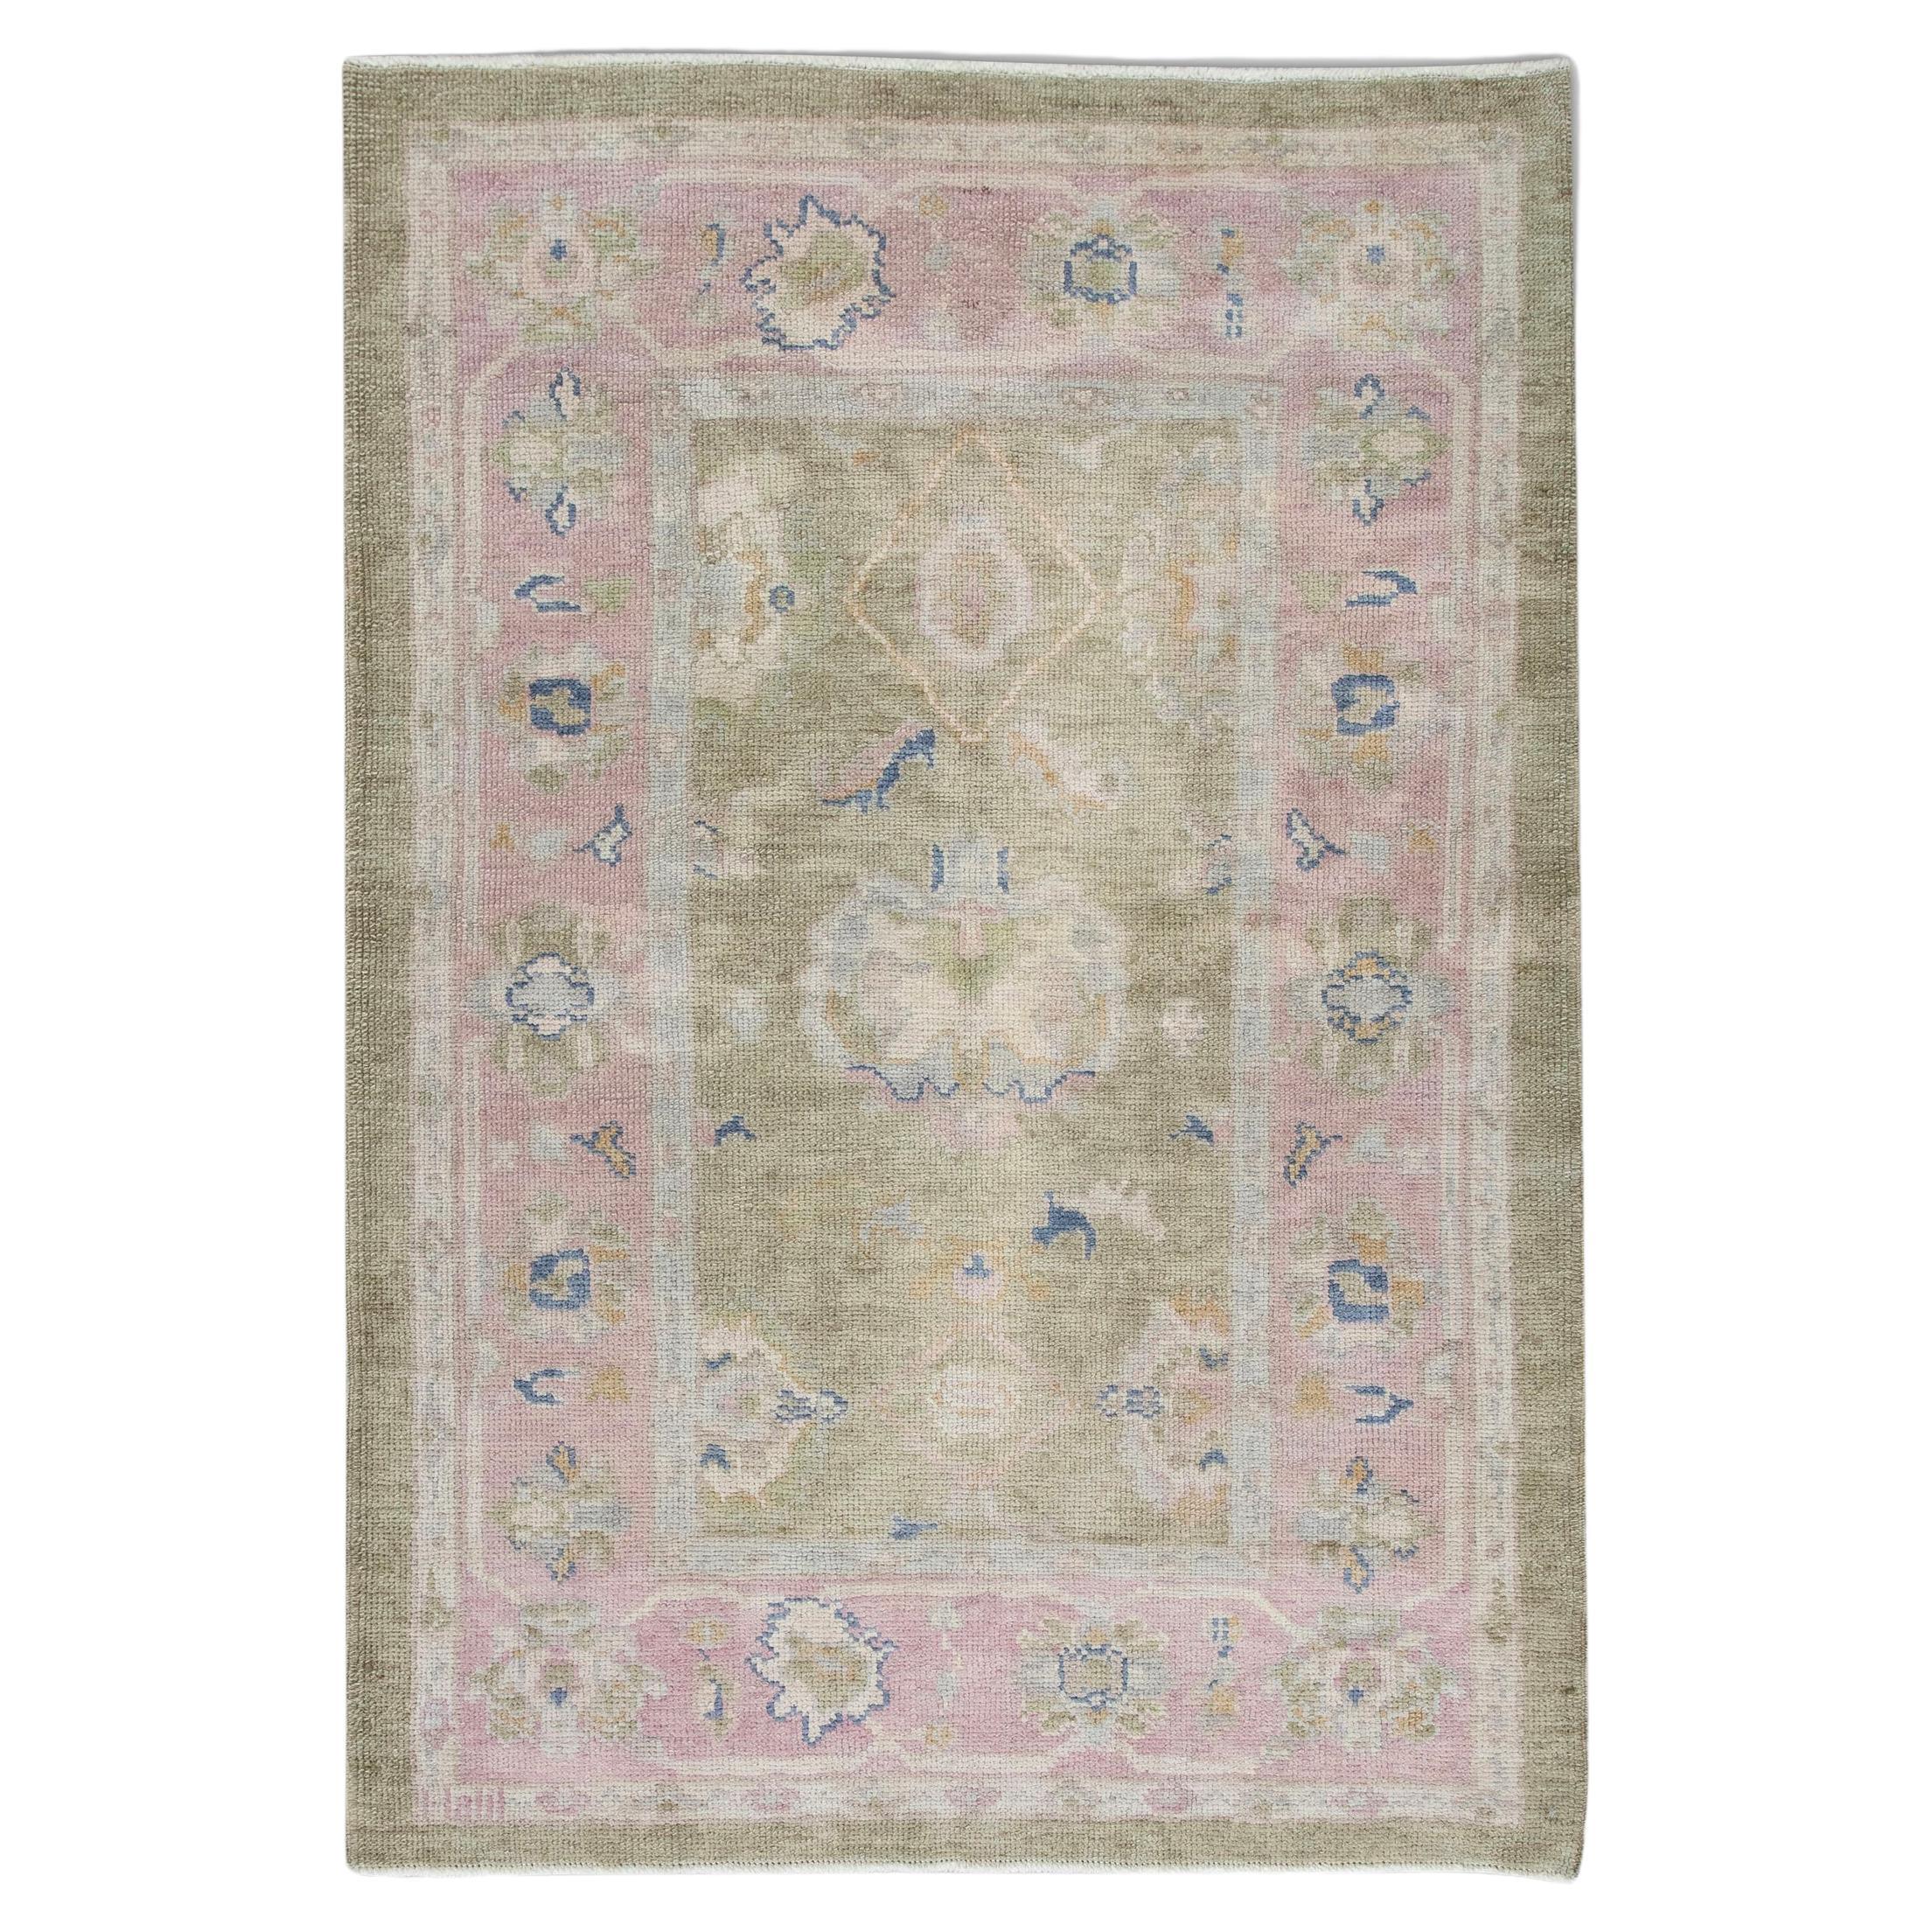 Olive Green and Pink Floral Design Handwoven Wool Turkish Oushak Rug 4'1" x 6'